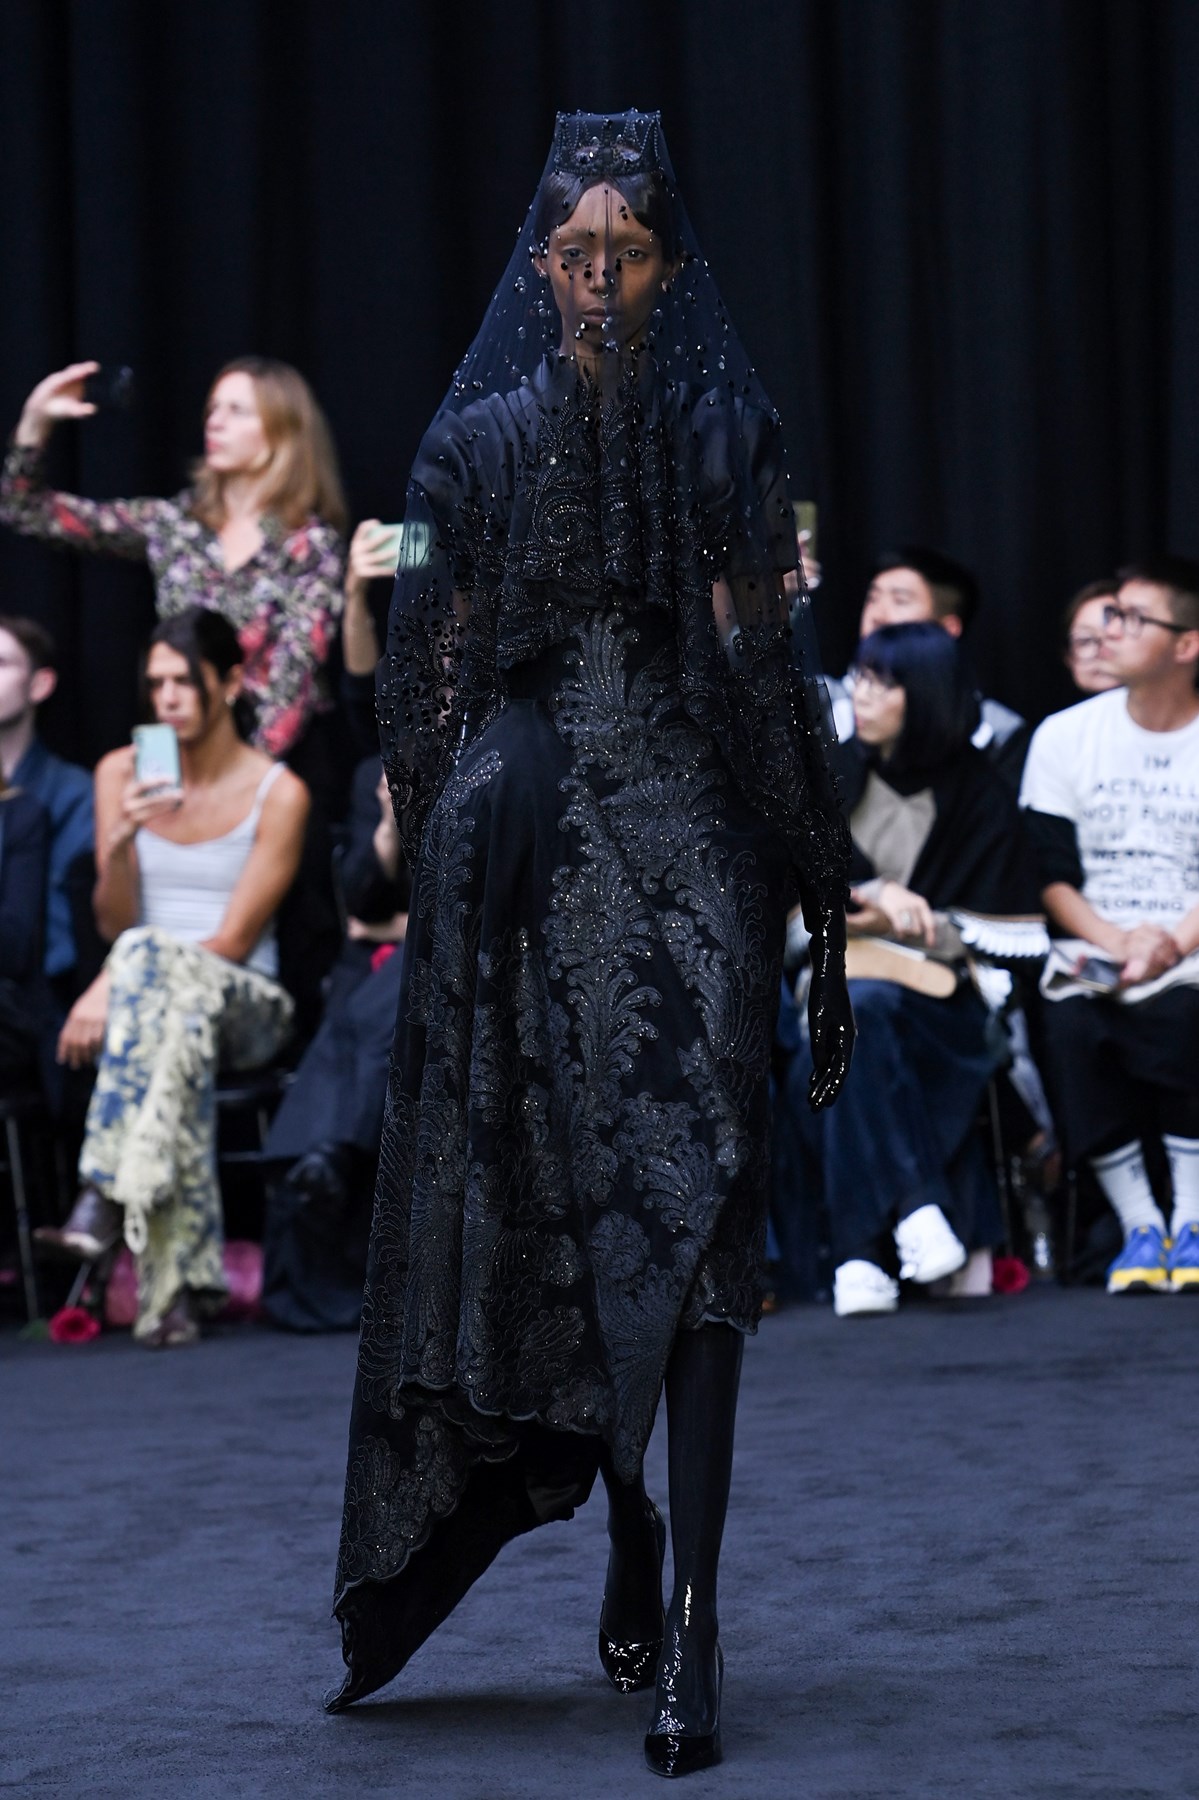 A model walks the runway during the Richard Quinn show during London